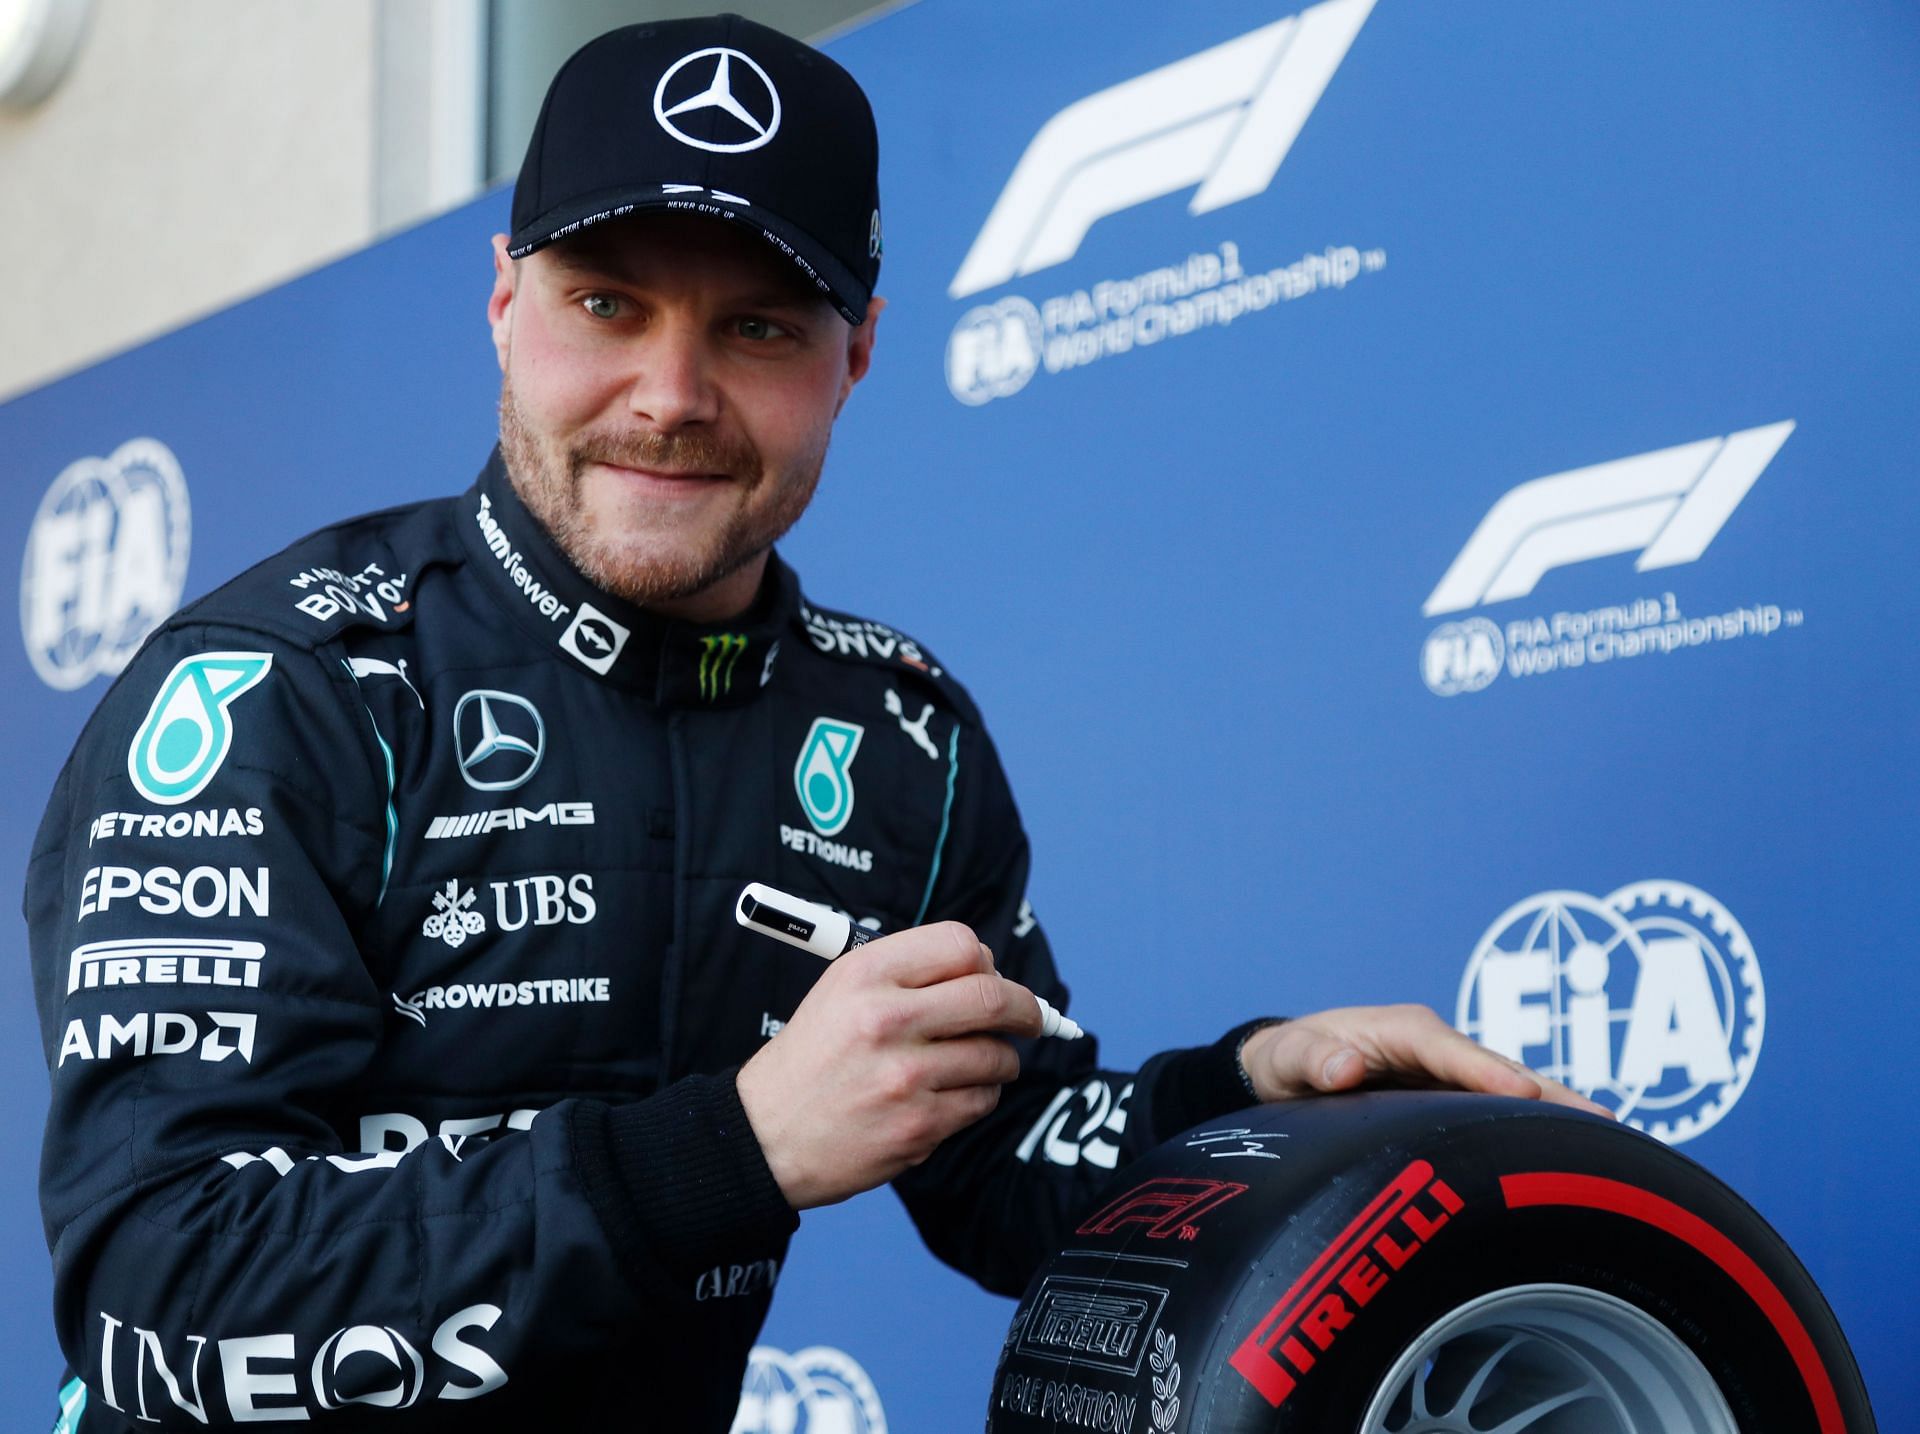 Pole position qualifier Valtteri Bottas of Finland celebrates in parc ferme post the qualifying session of the 2021 Mexican GP. (Photo by Francisco Guasco - Pool/Getty Images)